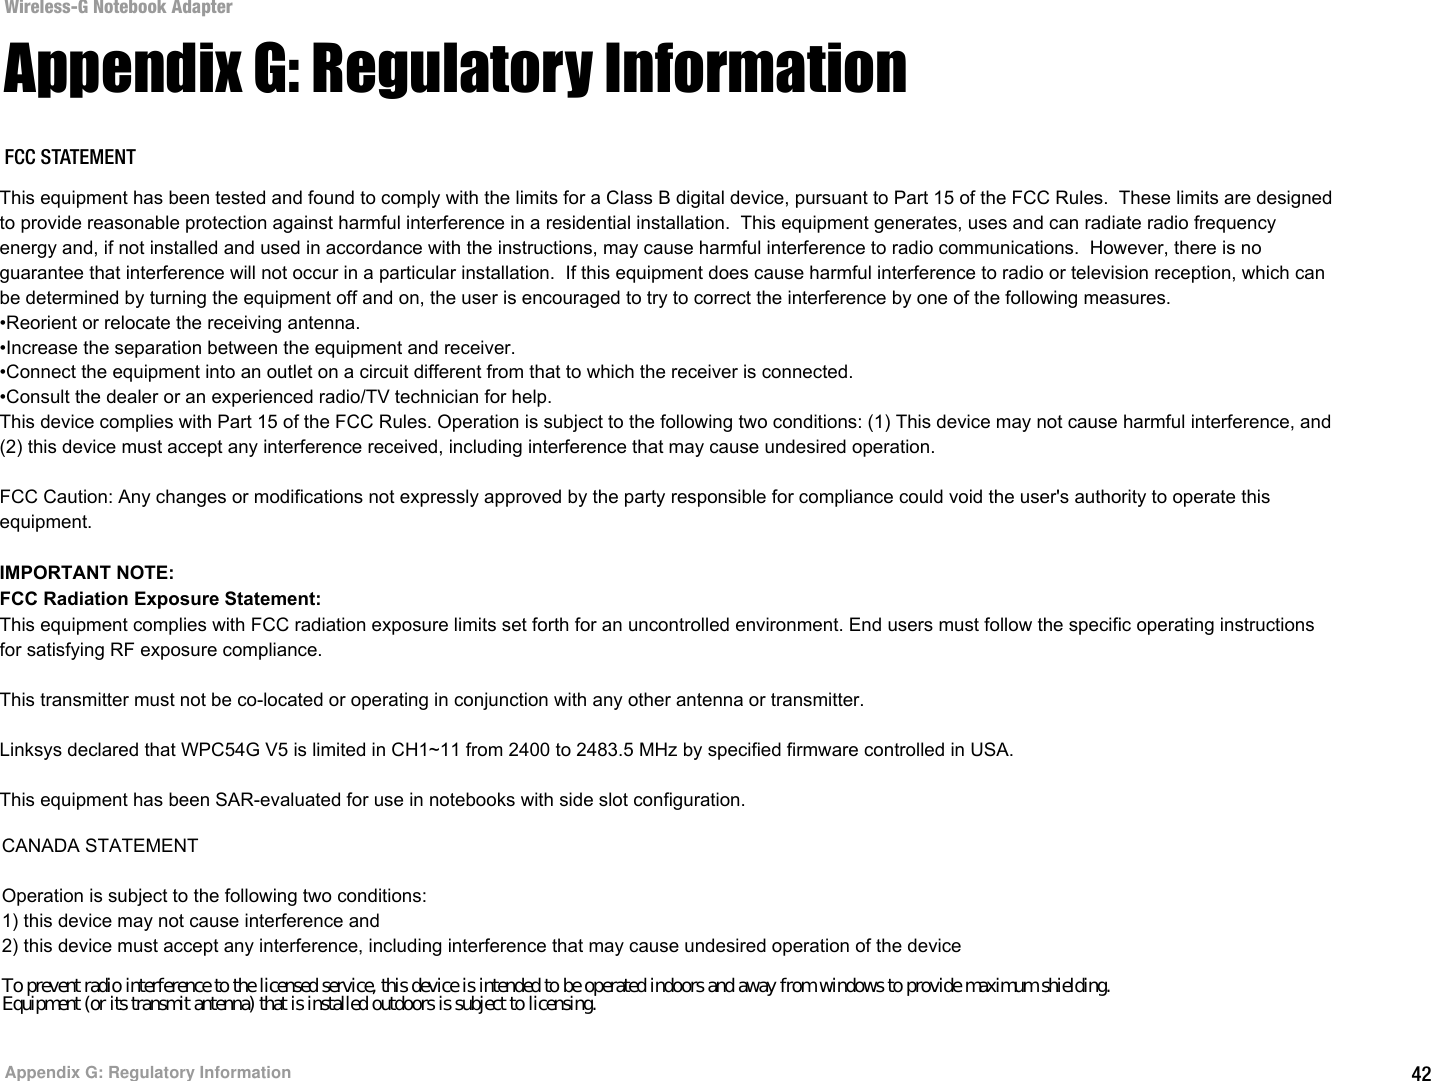 42Appendix G: Regulatory InformationWireless-G Notebook AdapterAppendix G: Regulatory InformationFCC STATEMENTThis product has been tested and complies with the specifications for a Class B digital device, pursuant to Part 15 of the FCC Rules. These limits are designed to provide reasonable protection against harmful interference in a residential installation. This equipment generates, uses, and can radiate radio frequency energy and, if not installed and used according to the instructions, may cause harmful interference to radio communications. However, there is no guarantee that interference will not occur in a particular installation. If this equipment does cause harmful interference to radio or television reception, which is found by turning the equipment off and on, the user is encouraged to try to correct the interference by one or more of the following measures:Reorient or relocate the receiving antennaIncrease the separation between the equipment or devicesConnect the equipment to an outlet other than the receiver&apos;sConsult a dealer or an experienced radio/TV technician for assistanceFCC Radiation Exposure StatementThis equipment complies with FCC radiation exposure limits set forth for an uncontrolled environment.  This equipment should be installed and operated with minimum distance 20cm between the radiator and your body.INDUSTRY CANADA (CANADA)This Class B digital apparatus complies with Canadian ICES-003.Cet appareil numérique de la classe B est conforme à la norme NMB-003 du Canada.The use of this device in a system operating either partially or completely outdoors may require the user to obtain a license for the system according to the Canadian regulations.EC DECLARATION OF CONFORMITY (EUROPE)Linksys declares that the Wireless-G Notebook Adapter conforms to the specifications listed below, following the provisions of the European R&amp;TTE directive 1999/5/EC: EN 301 489-1, 301 489-17 General EMC requirements for Radio equipment.EN 609 50 SafetyThis equipment has been tested and found to comply with the limits for a Class B digital device, pursuant to Part 15 of the FCC Rules.  These limits are designed to provide reasonable protection against harmful interference in a residential installation.  This equipment generates, uses and can radiate radio frequency energy and, if not installed and used in accordance with the instructions, may cause harmful interference to radio communications.  However, there is no guarantee that interference will not occur in a particular installation.  If this equipment does cause harmful interference to radio or television reception, which can be determined by turning the equipment off and on, the user is encouraged to try to correct the interference by one of the following measures.•Reorient or relocate the receiving antenna.•Increase the separation between the equipment and receiver.•Connect the equipment into an outlet on a circuit different from that to which the receiver is connected.•Consult the dealer or an experienced radio/TV technician for help.This device complies with Part 15 of the FCC Rules. Operation is subject to the following two conditions: (1) This device may not cause harmful interference, and (2) this device must accept any interference received, including interference that may cause undesired operation.FCC Caution: Any changes or modifications not expressly approved by the party responsible for compliance could void the user&apos;s authority to operate this equipment.IMPORTANT NOTE:FCC Radiation Exposure Statement:This equipment complies with FCC radiation exposure limits set forth for an uncontrolled environment. End users must follow the specific operating instructions for satisfying RF exposure compliance.This transmitter must not be co-located or operating in conjunction with any other antenna or transmitter.Linksys declared that WPC54G V5 is limited in CH1~11 from 2400 to 2483.5 MHz by specified firmware controlled in USA.This equipment has been SAR-evaluated for use in notebooks with side slot configuration.CANADA STATEMENTOperation is subject to the following two conditions:1) this device may not cause interference and2) this device must accept any interference, including interference that may cause undesired operation of the deviceTo prevent radio interference to the licensed service, this device is intended to be operated indoors and away from windows to provide maximum shielding.Equipment (or its transmit antenna) that is installed outdoors is subject to licensing.